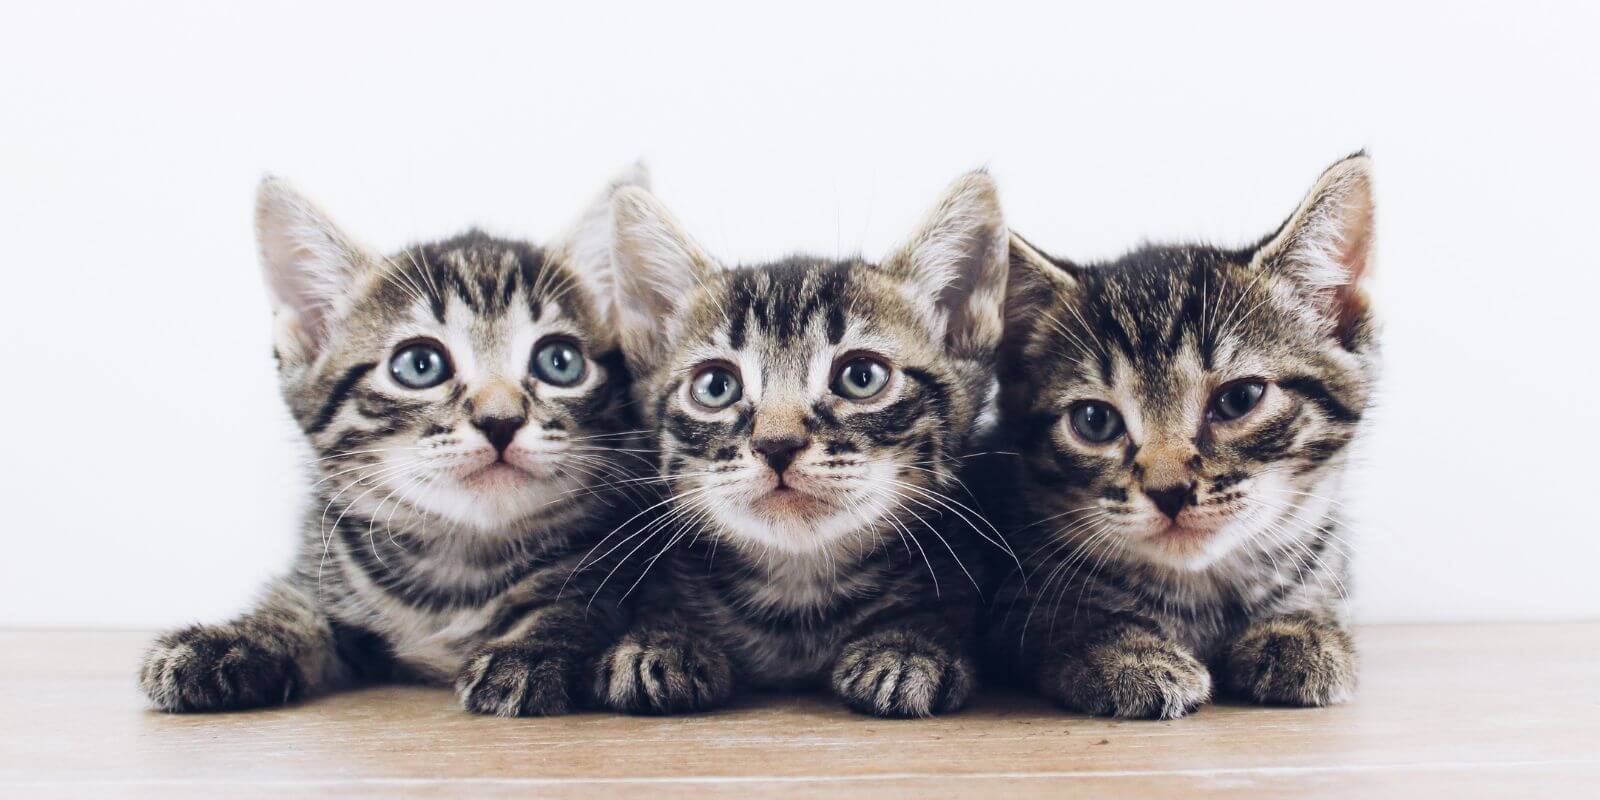 3 grey, black, and white kittens laying down in a row against a white background